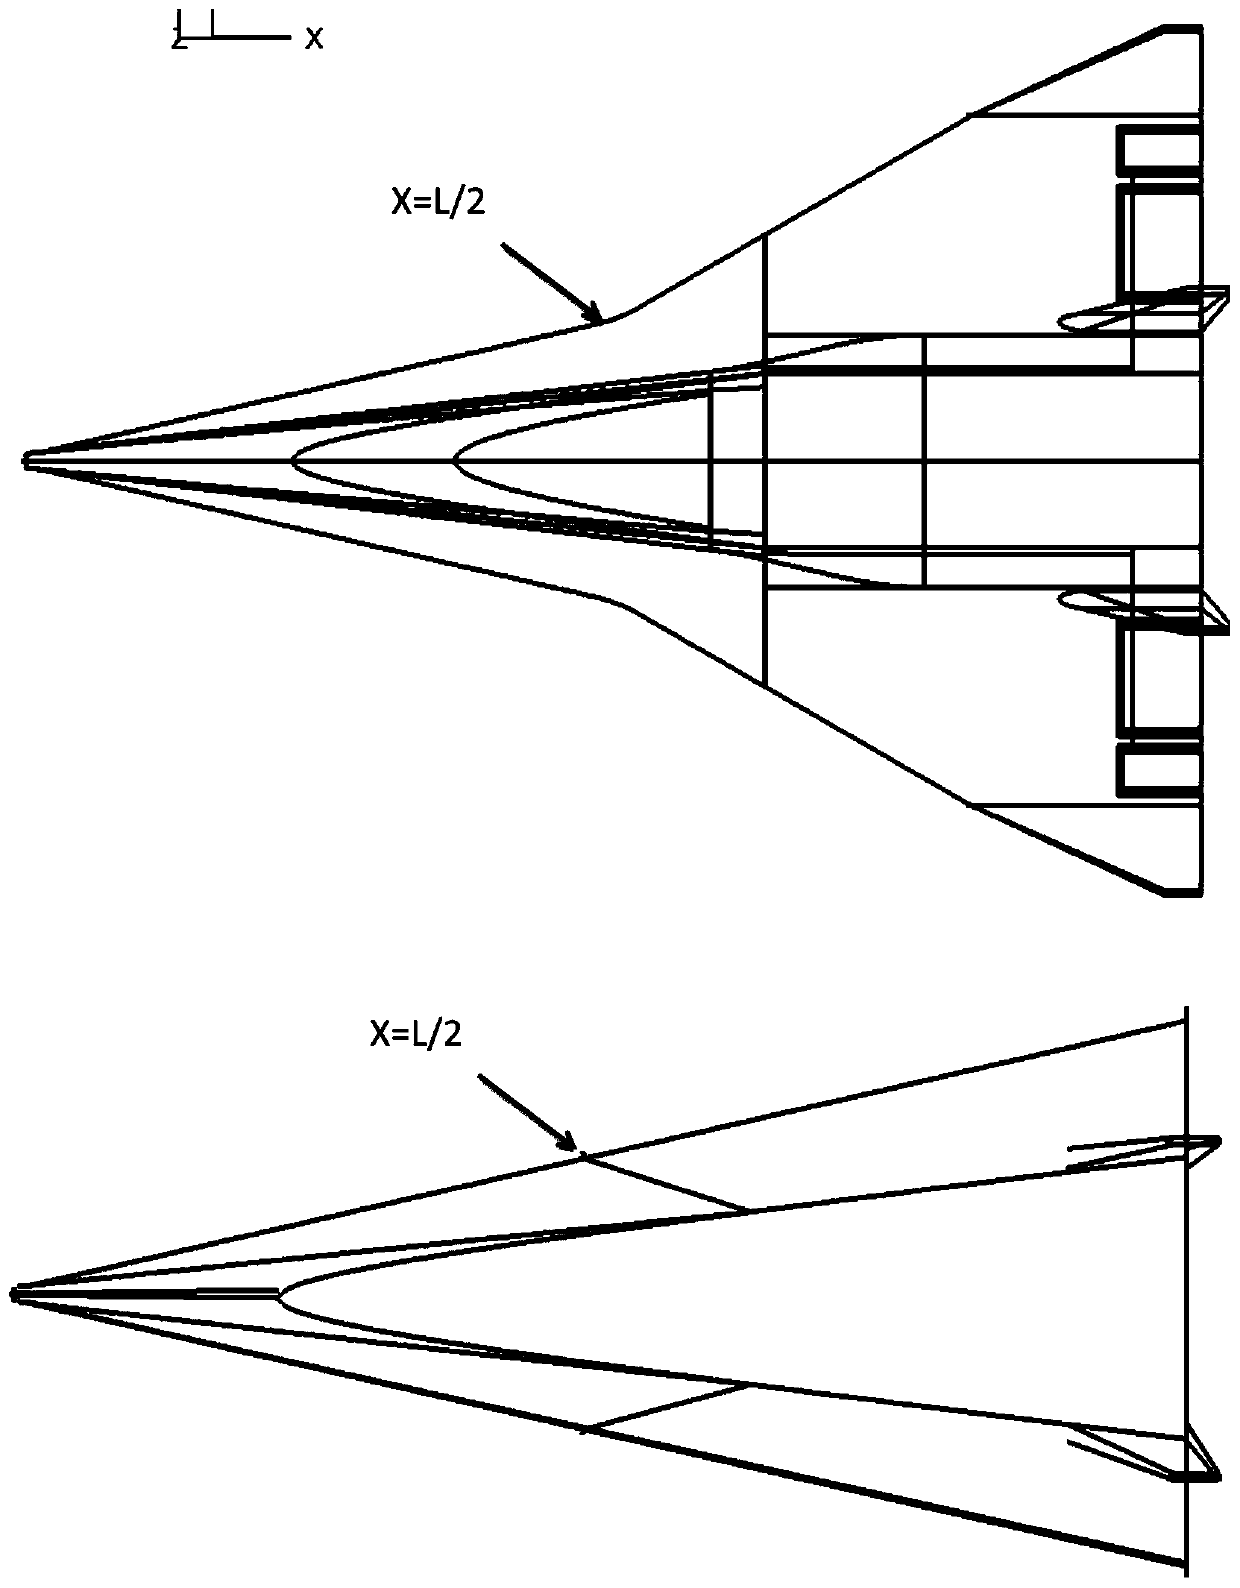 Simplified model design method suitable for mechanism research of complex hypersonic aircraft